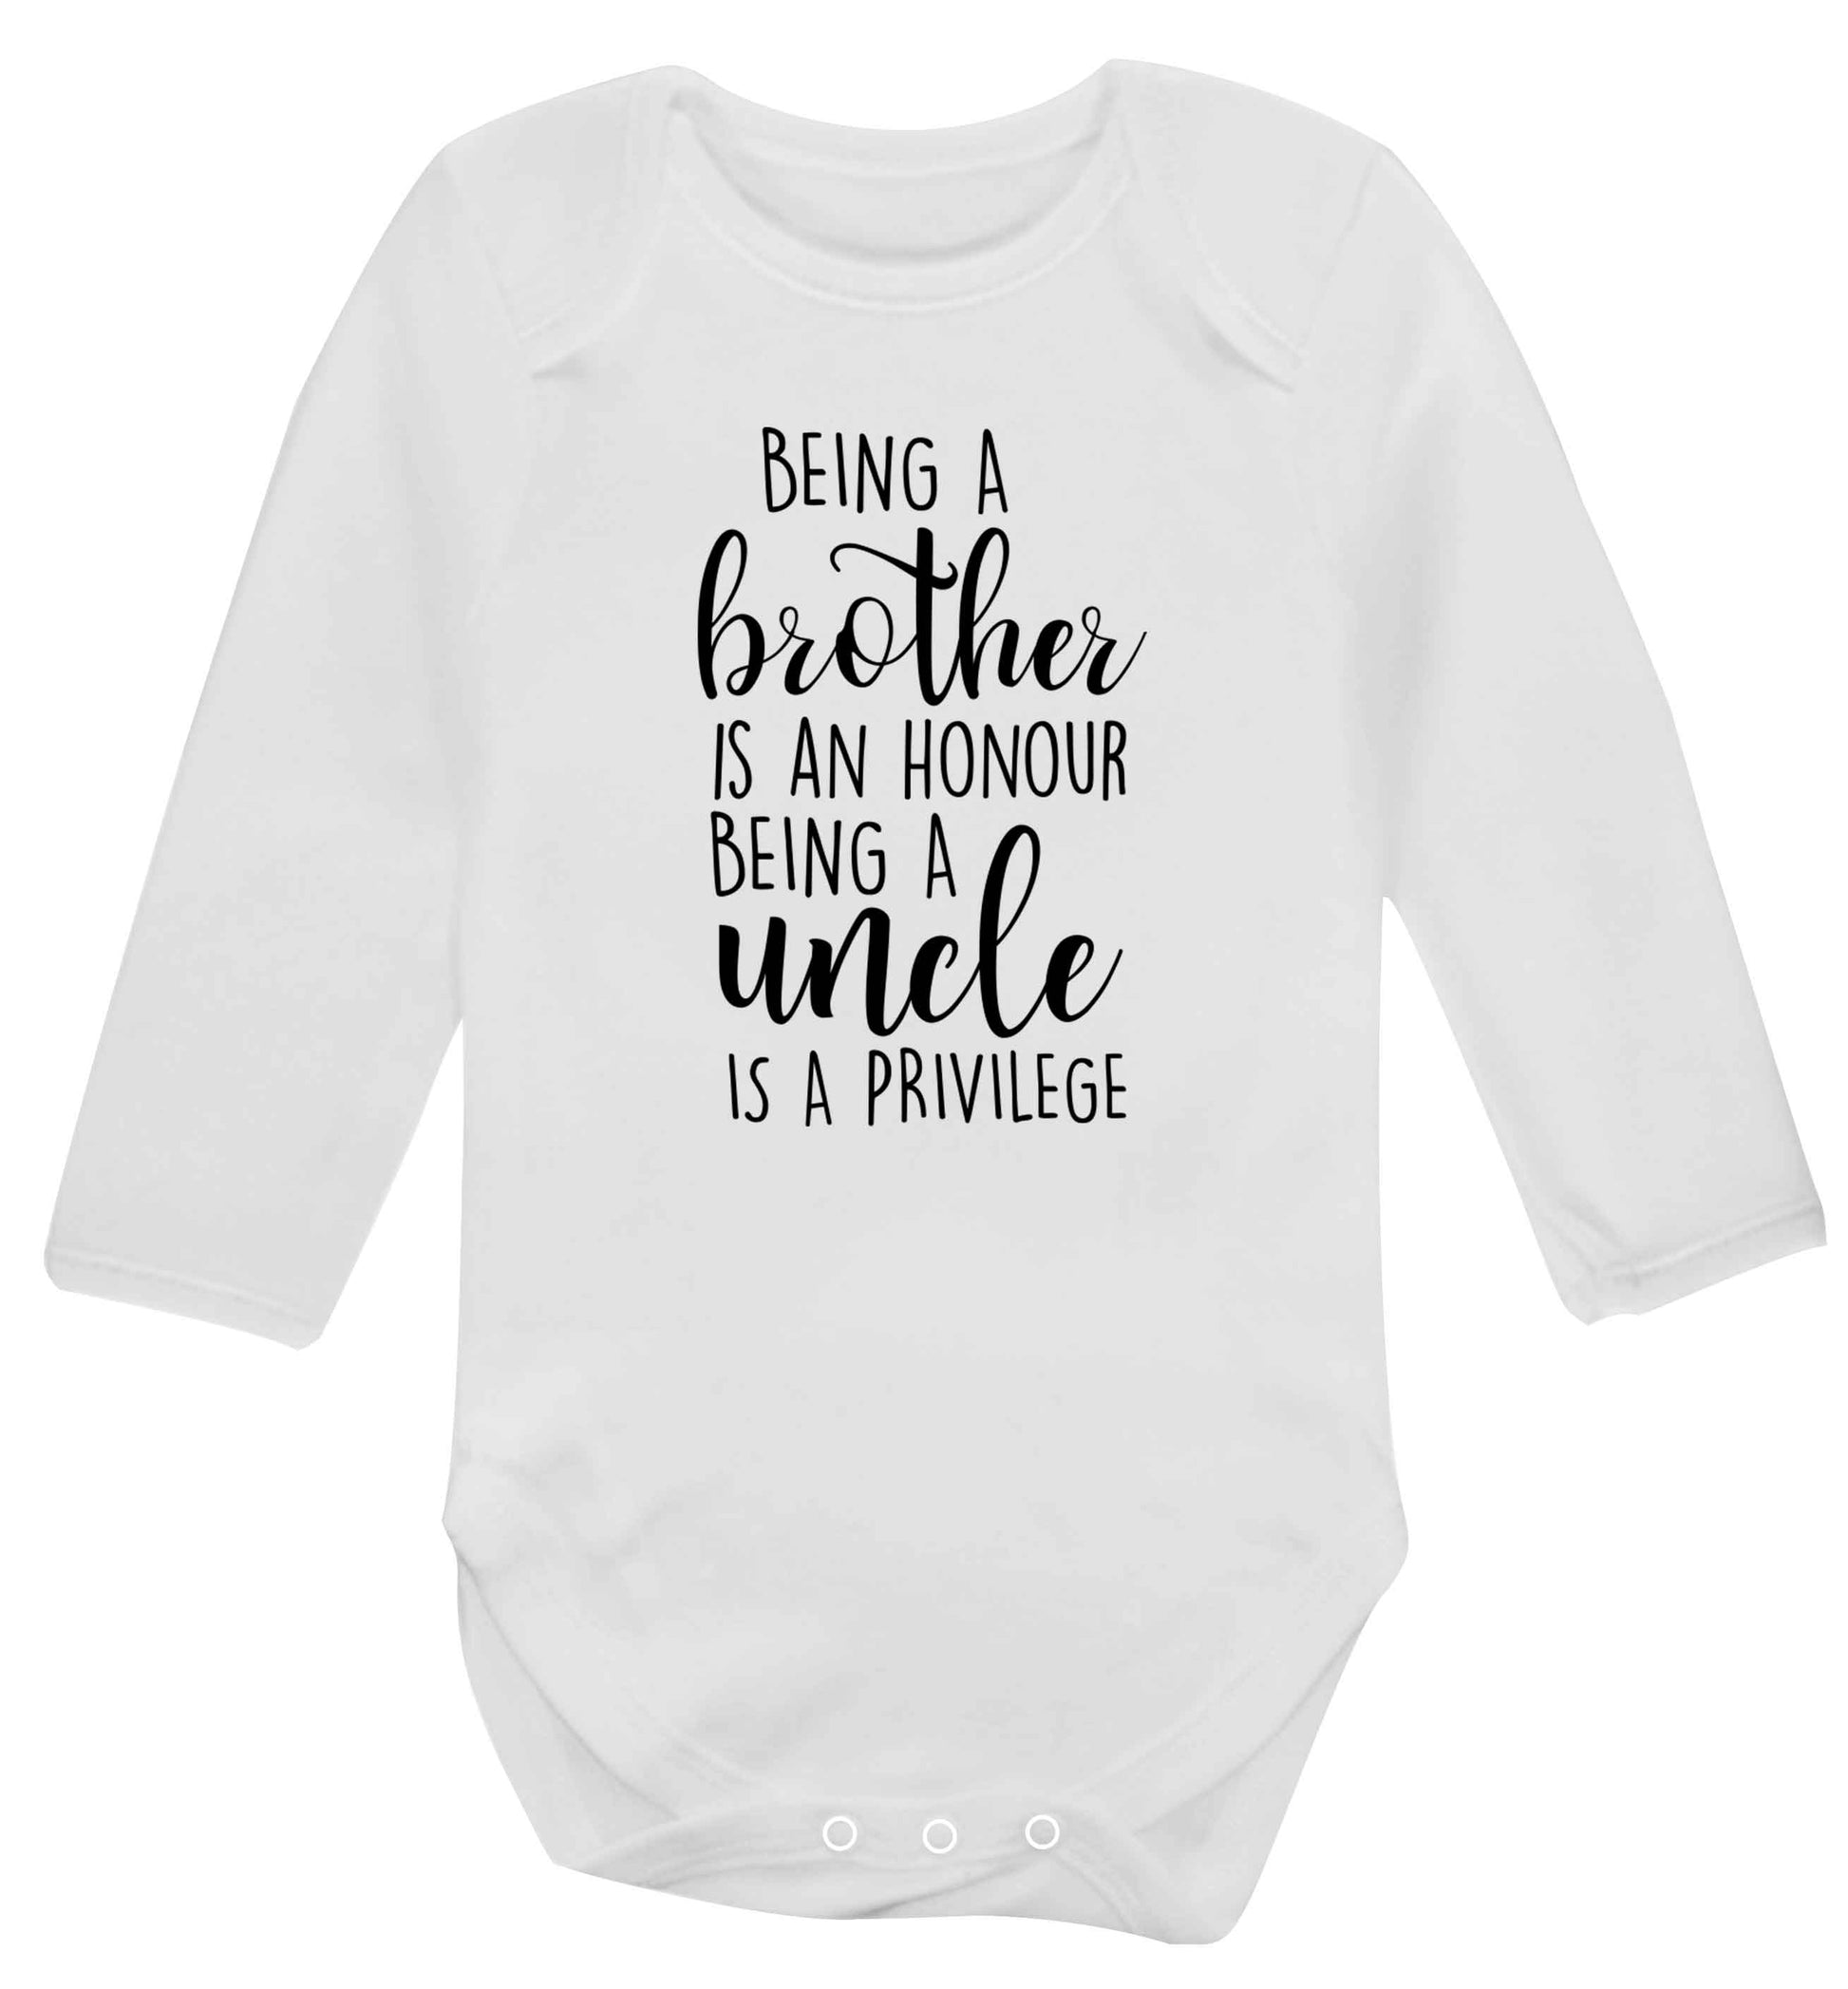 Being a brother is an honour being an uncle is a privilege Baby Vest long sleeved white 6-12 months